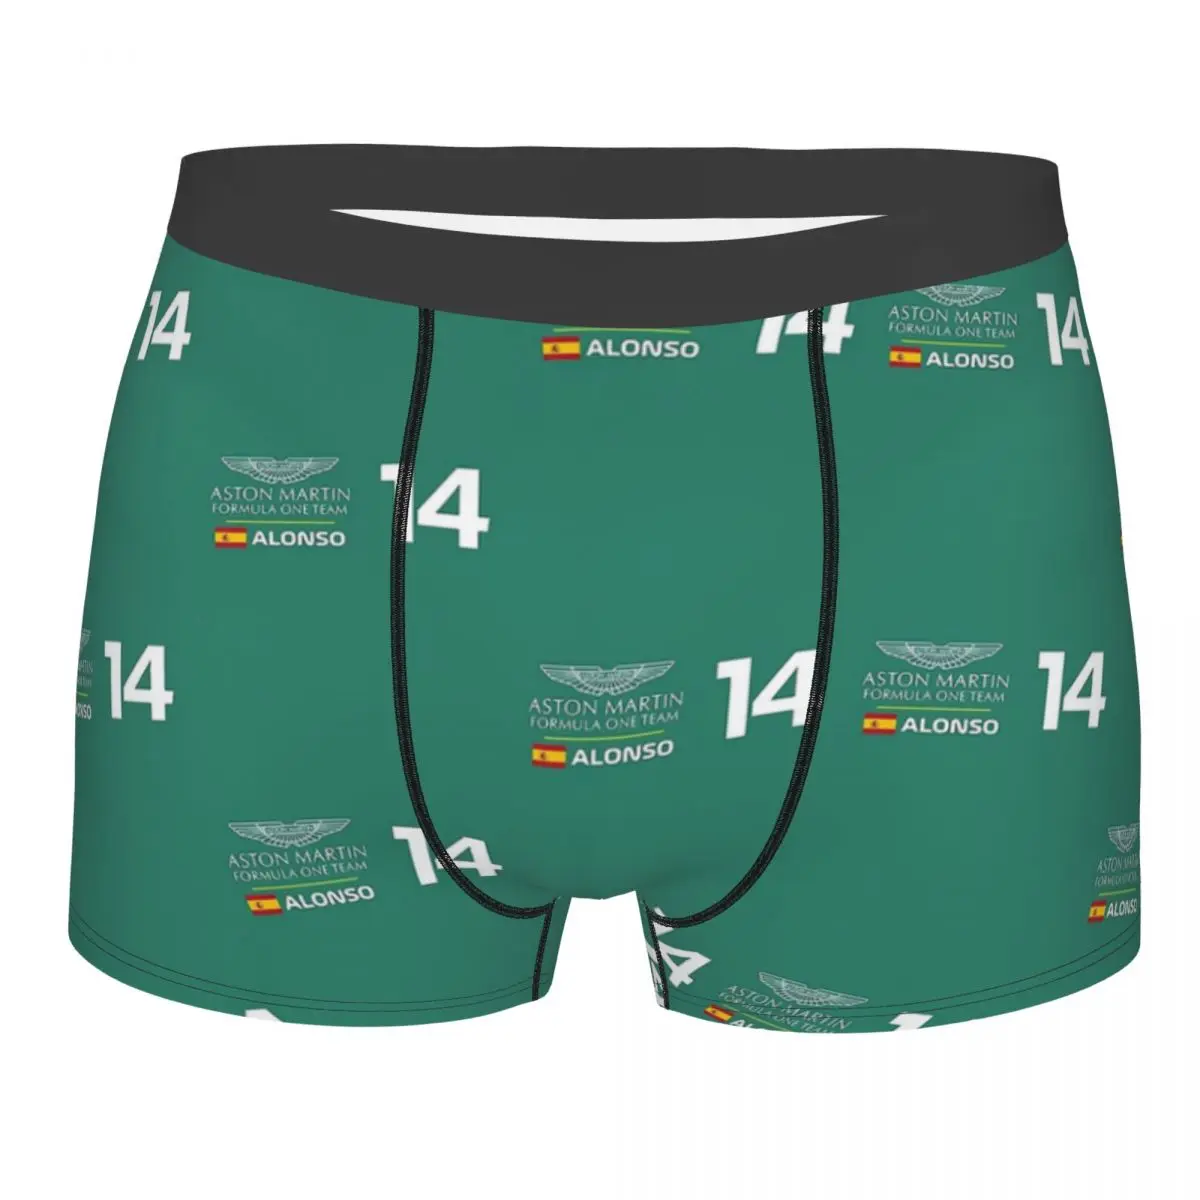 Fernando Alonso 14 F1 - Formula One2 Man's Boxer Briefs Underpants Highly Breathable Top Quality Birthday Gifts